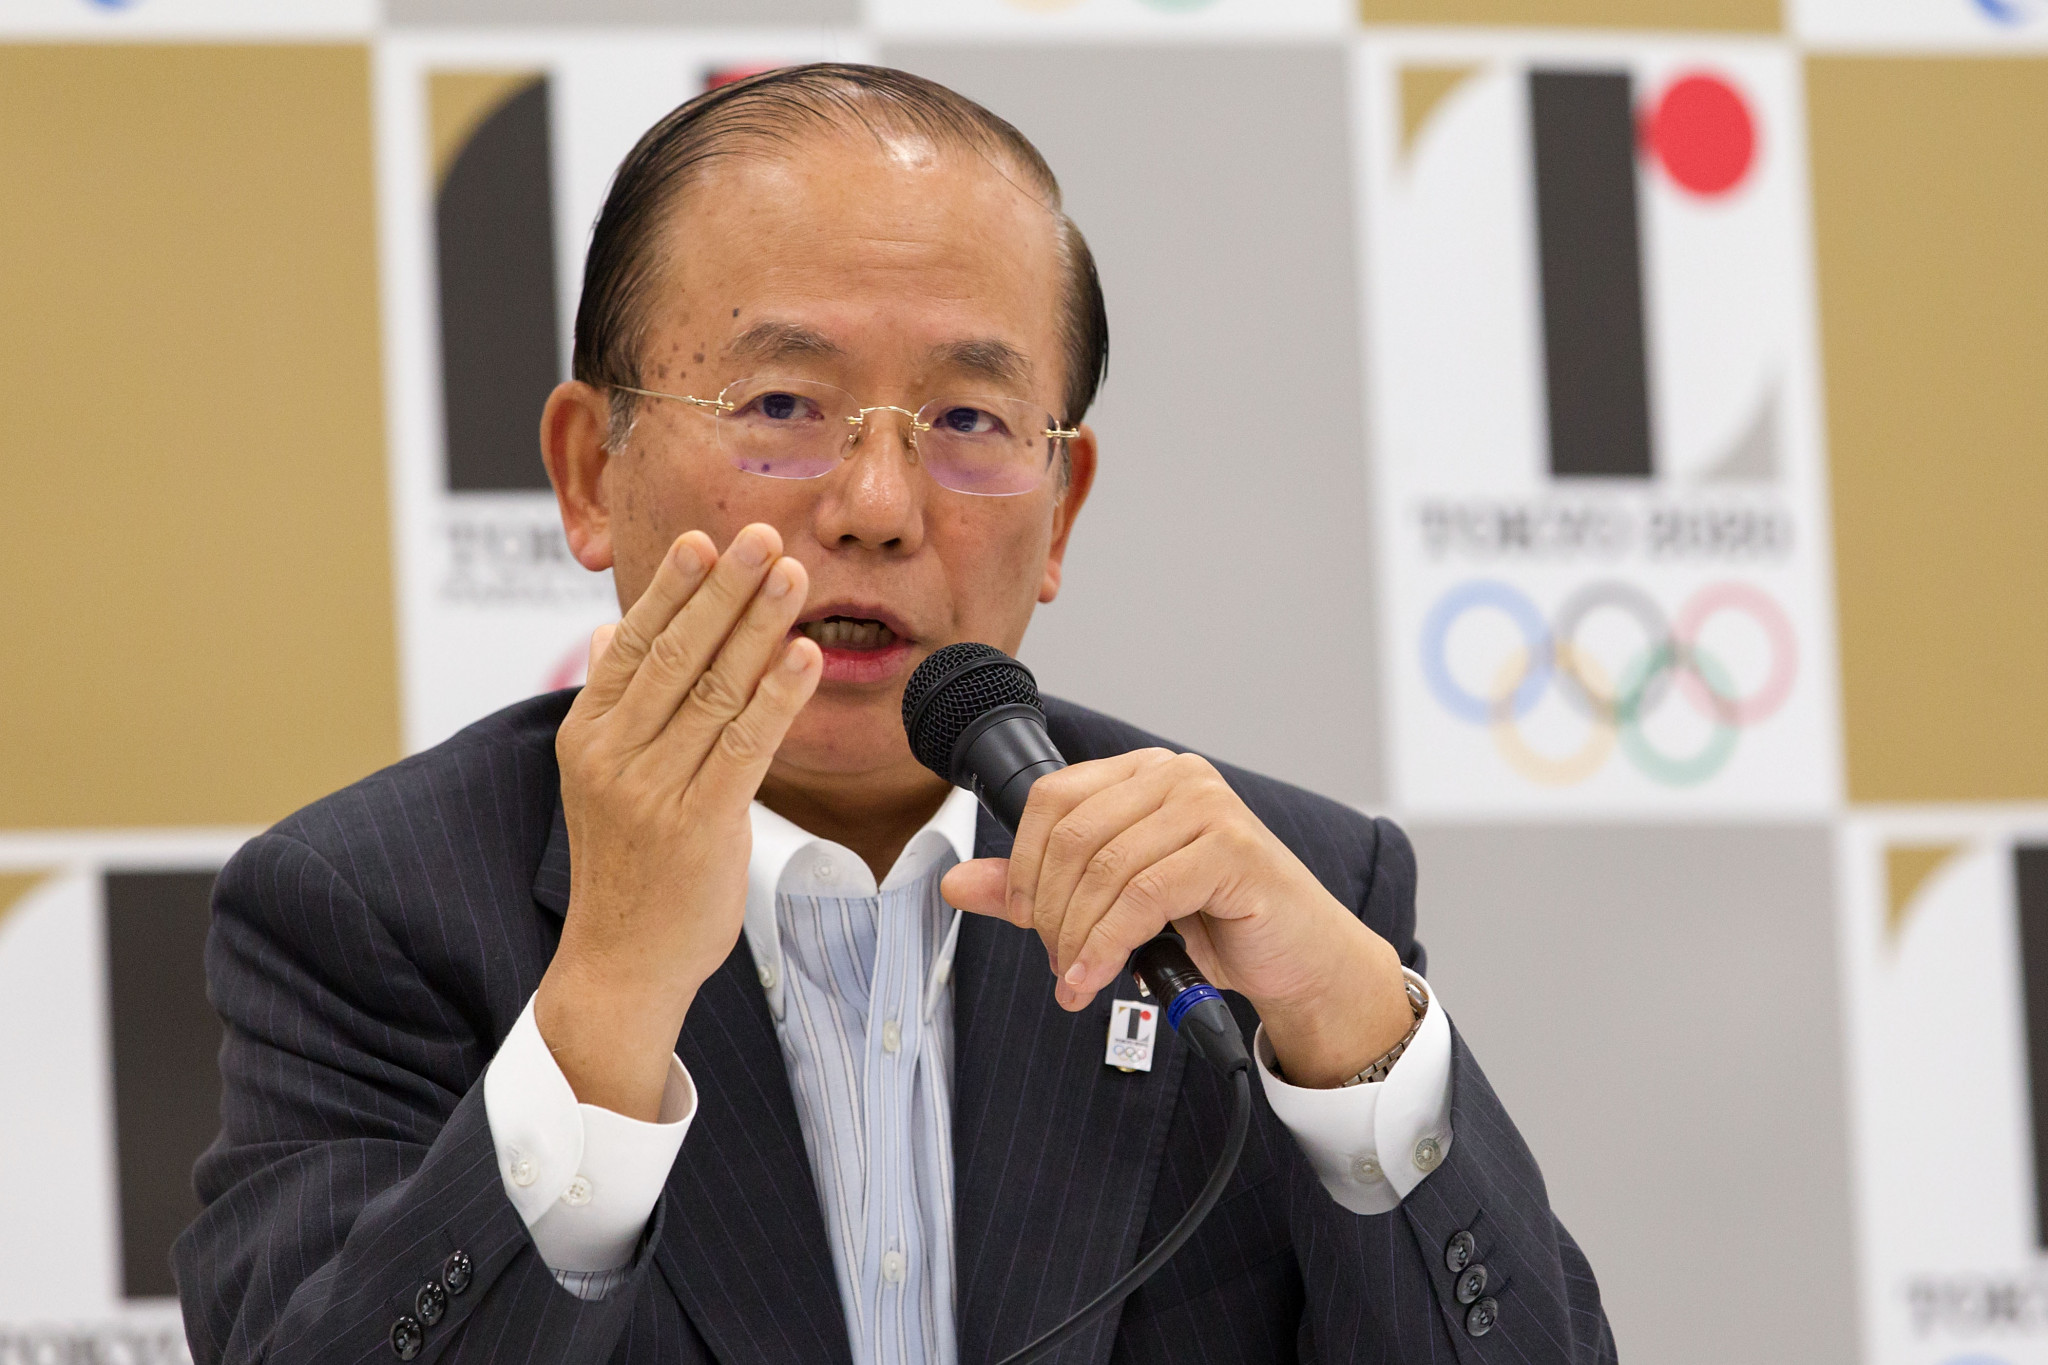 Tokyo 2020 chief executive Toshirō Mutō says organisers will come up with measures for spectators "by next spring" ©Getty Images